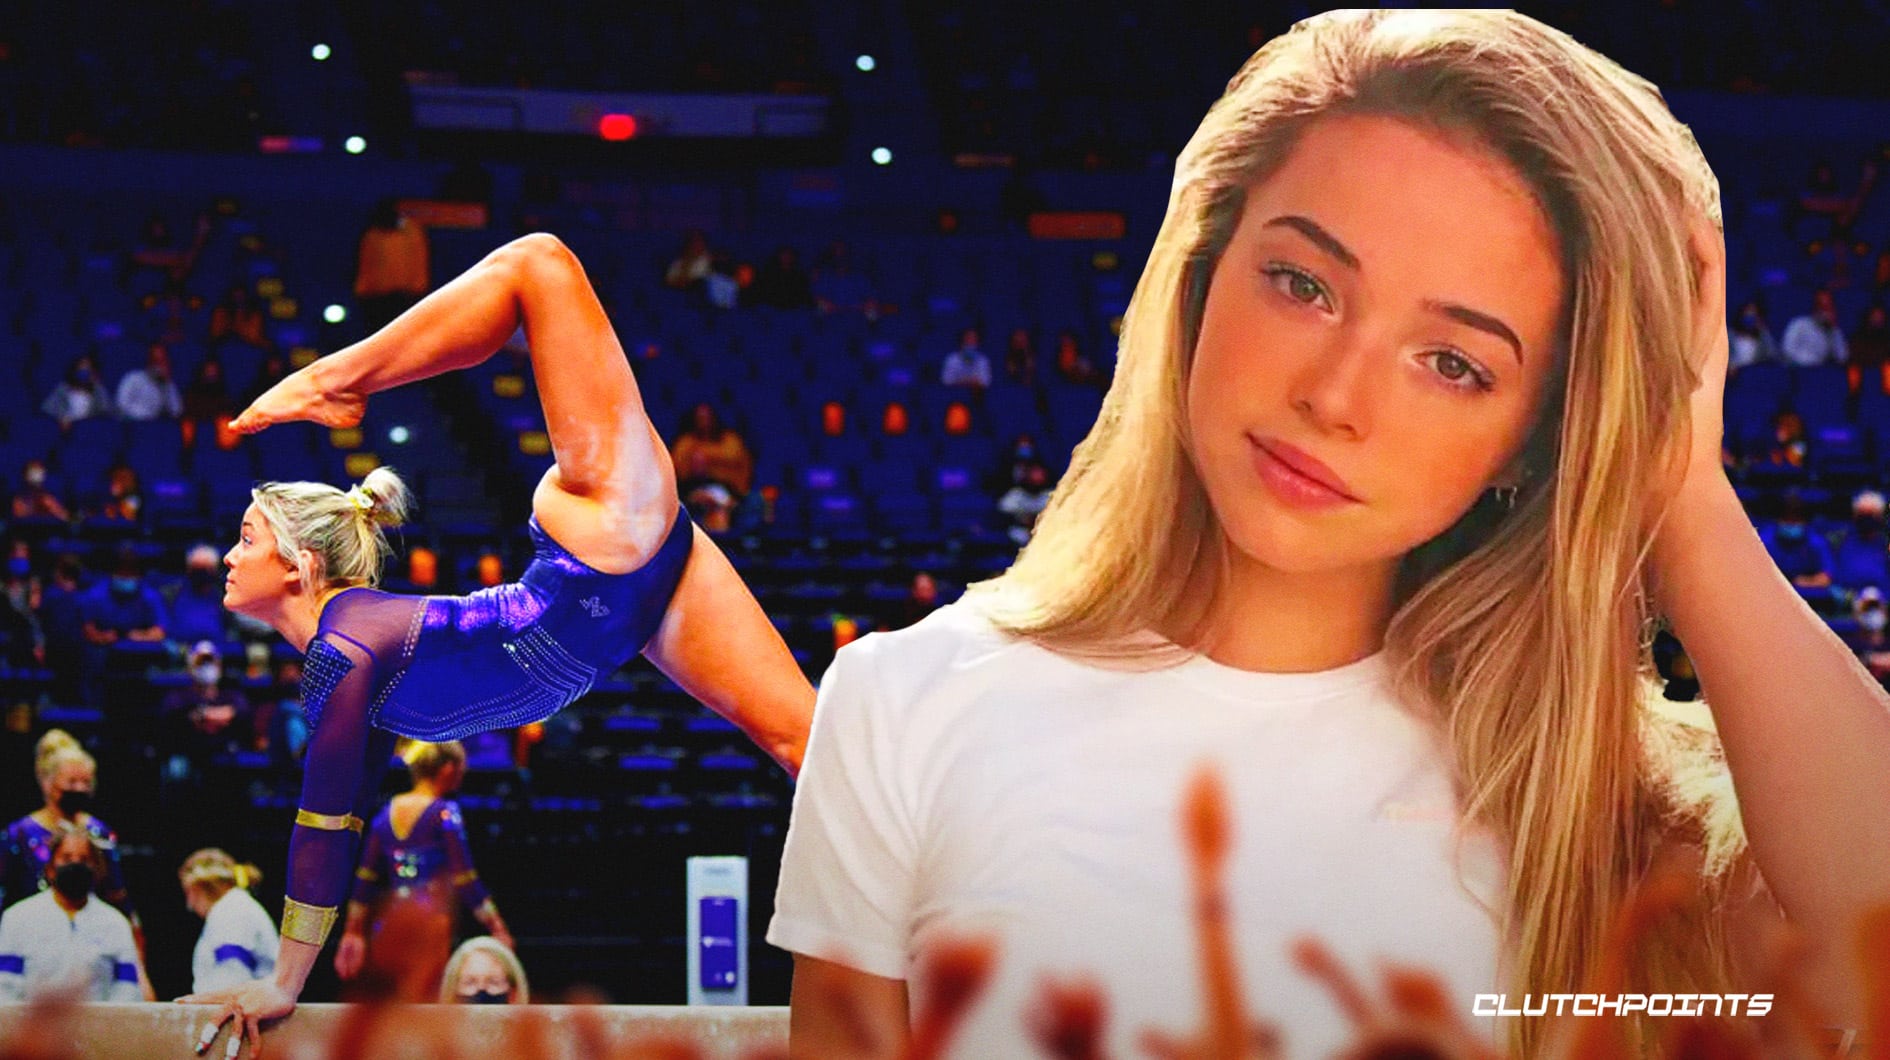 LSU gymnastics Olivia Dunne on how she wants to use her insane popularity